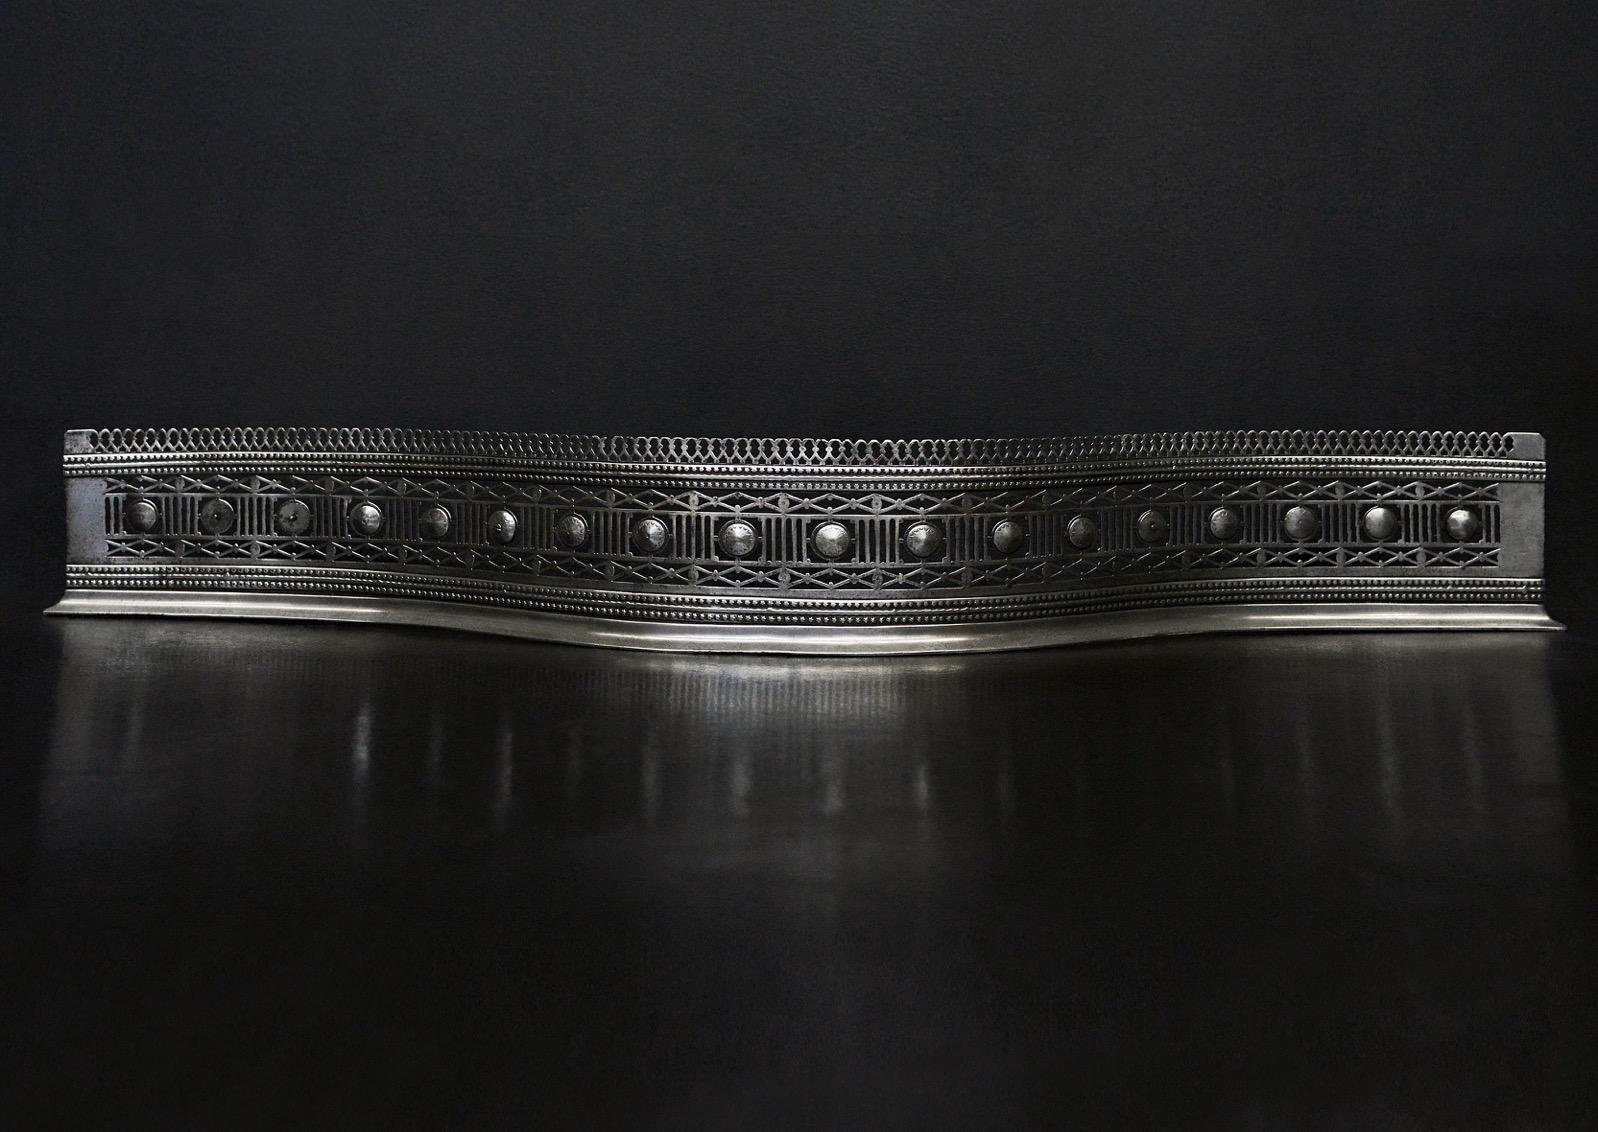 A fine quality serpentine fender in the Georgian manner. The pierced fret with engraved paterae, beading and diamond motif throughout. Polished steel. English, 19th century.

Measures: External width: 1255 mm 49 